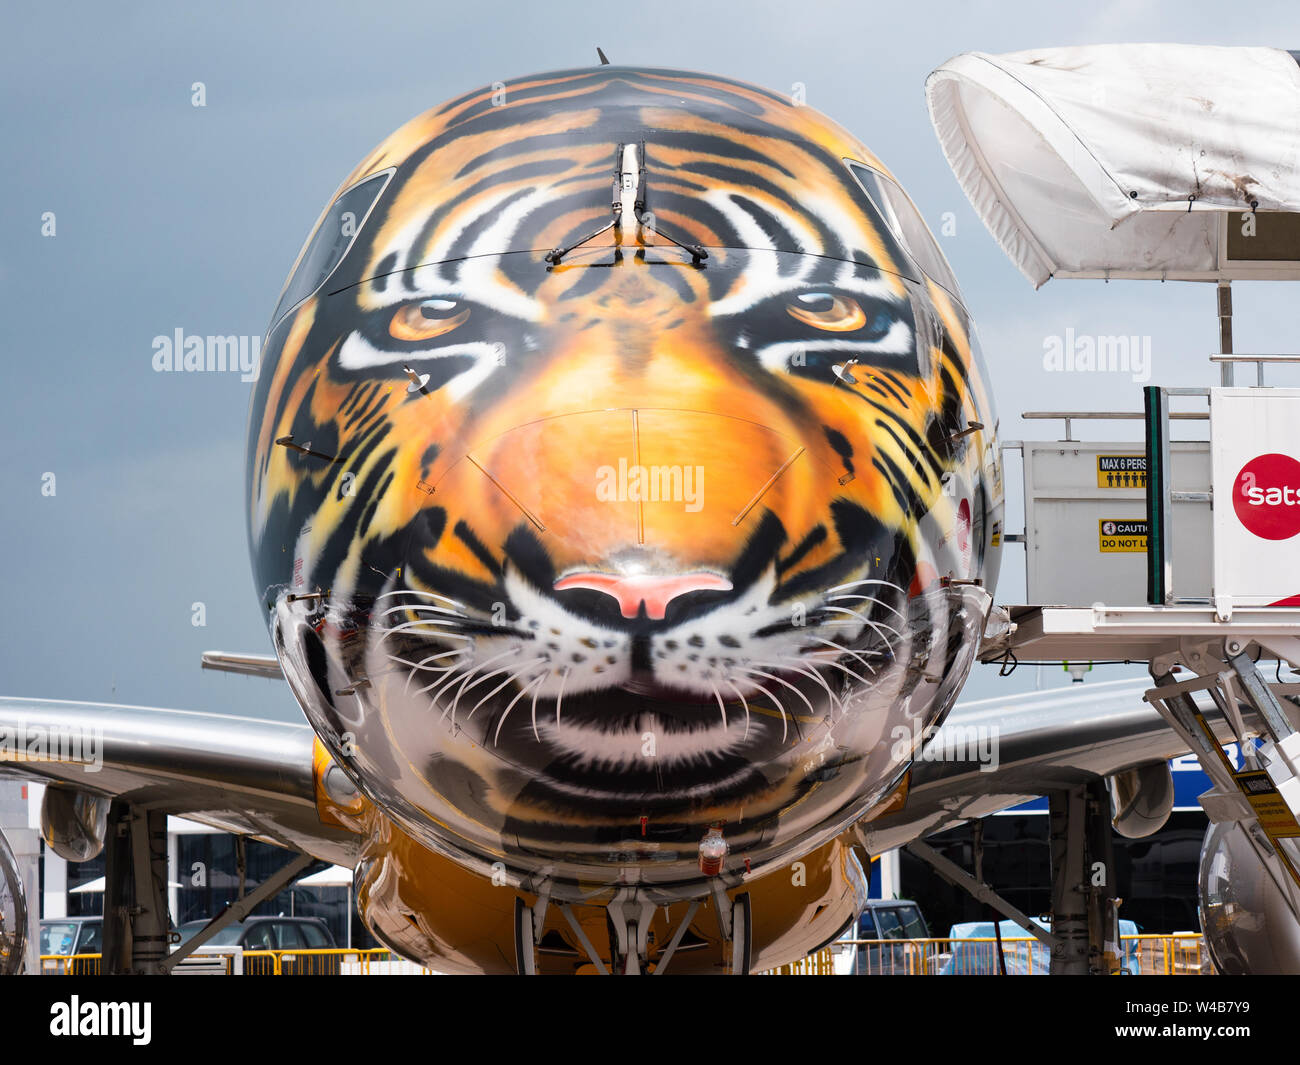 Singapore - February 4, 2018: Embraer E190-E2, with the front section decorated as a tiger head, on display during Singapore Airshow at Changi Exhibit Stock Photo